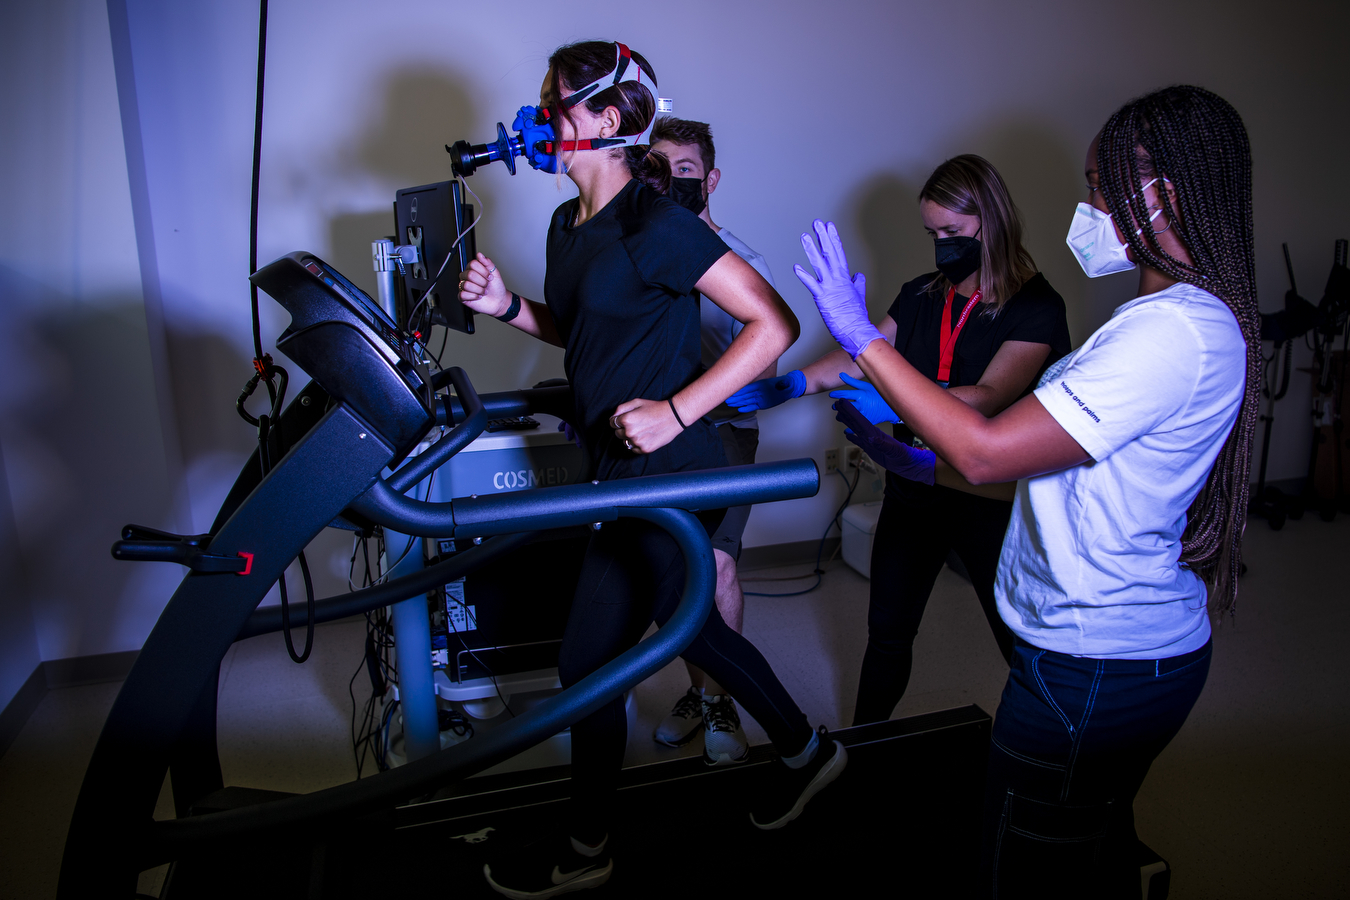 a study participant runs on a treadmill while three researchers look on